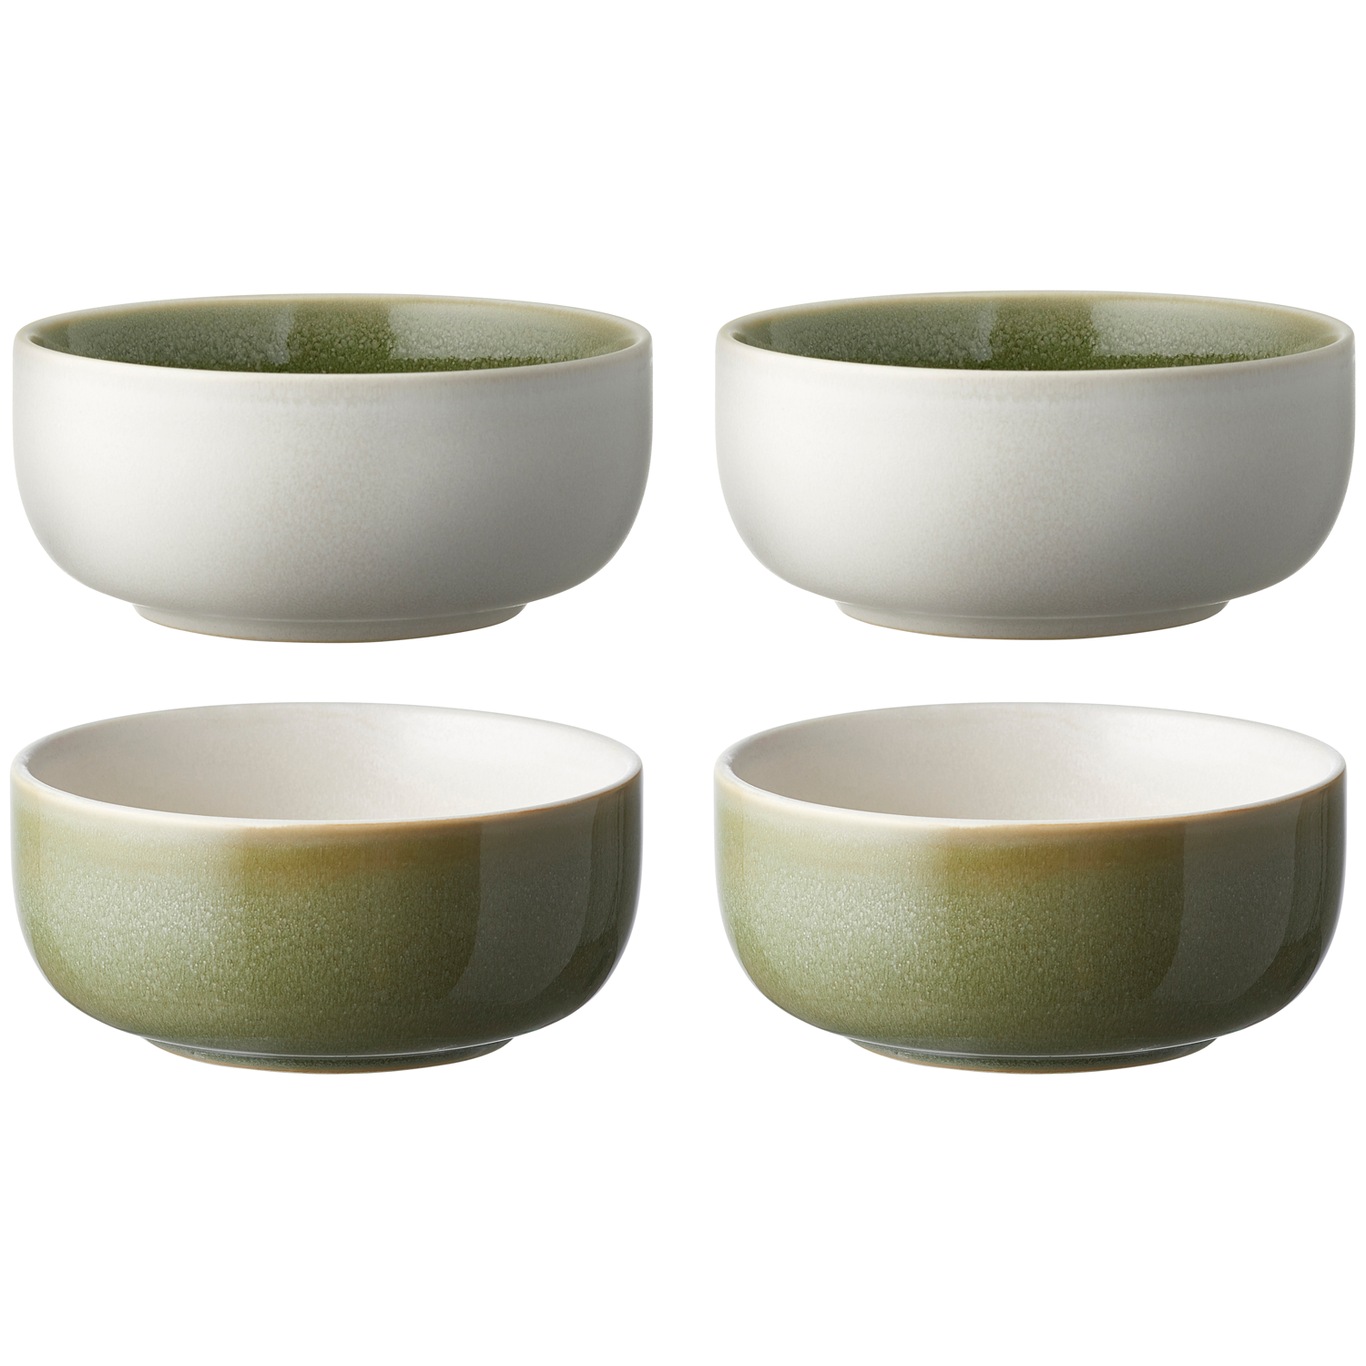 North Bowl 4-pack, Moss Mix